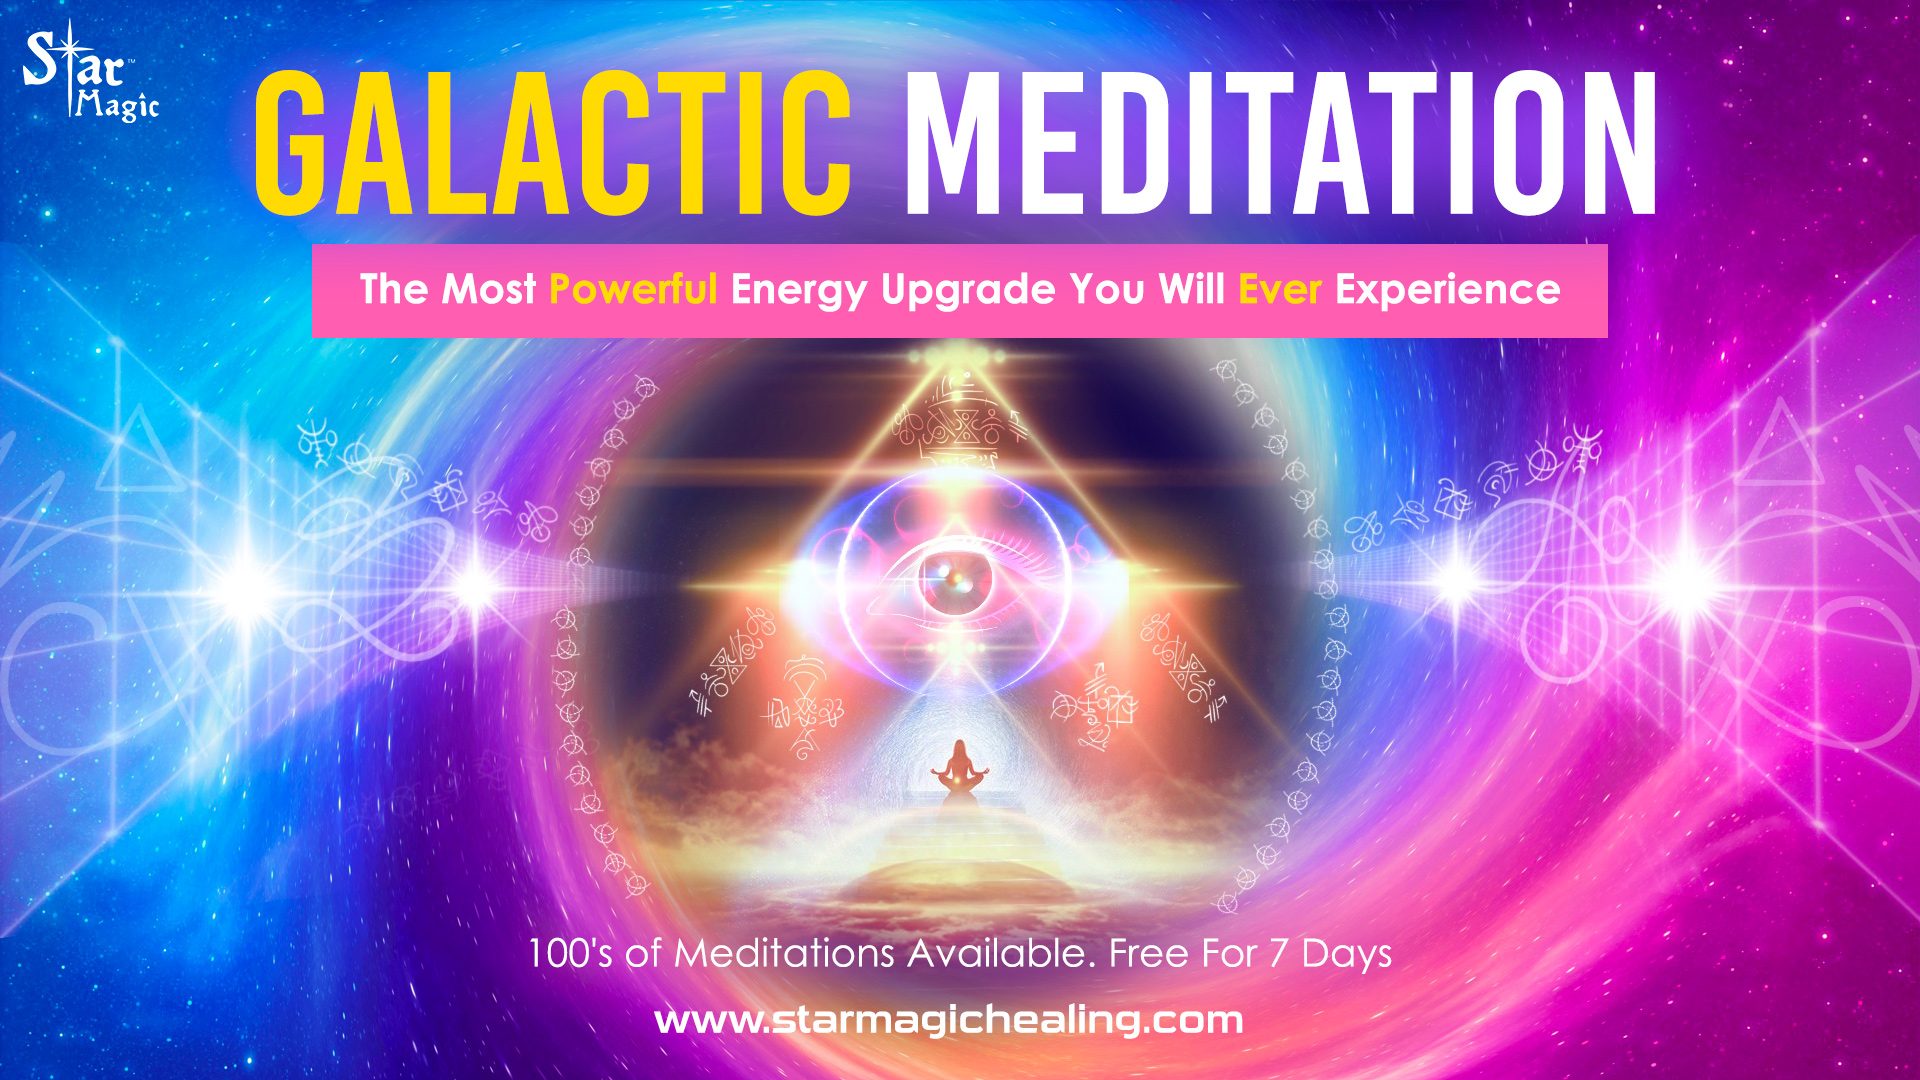 Galactic Meditation I DNA & 3rd Eye Activation and High Frequency Beings